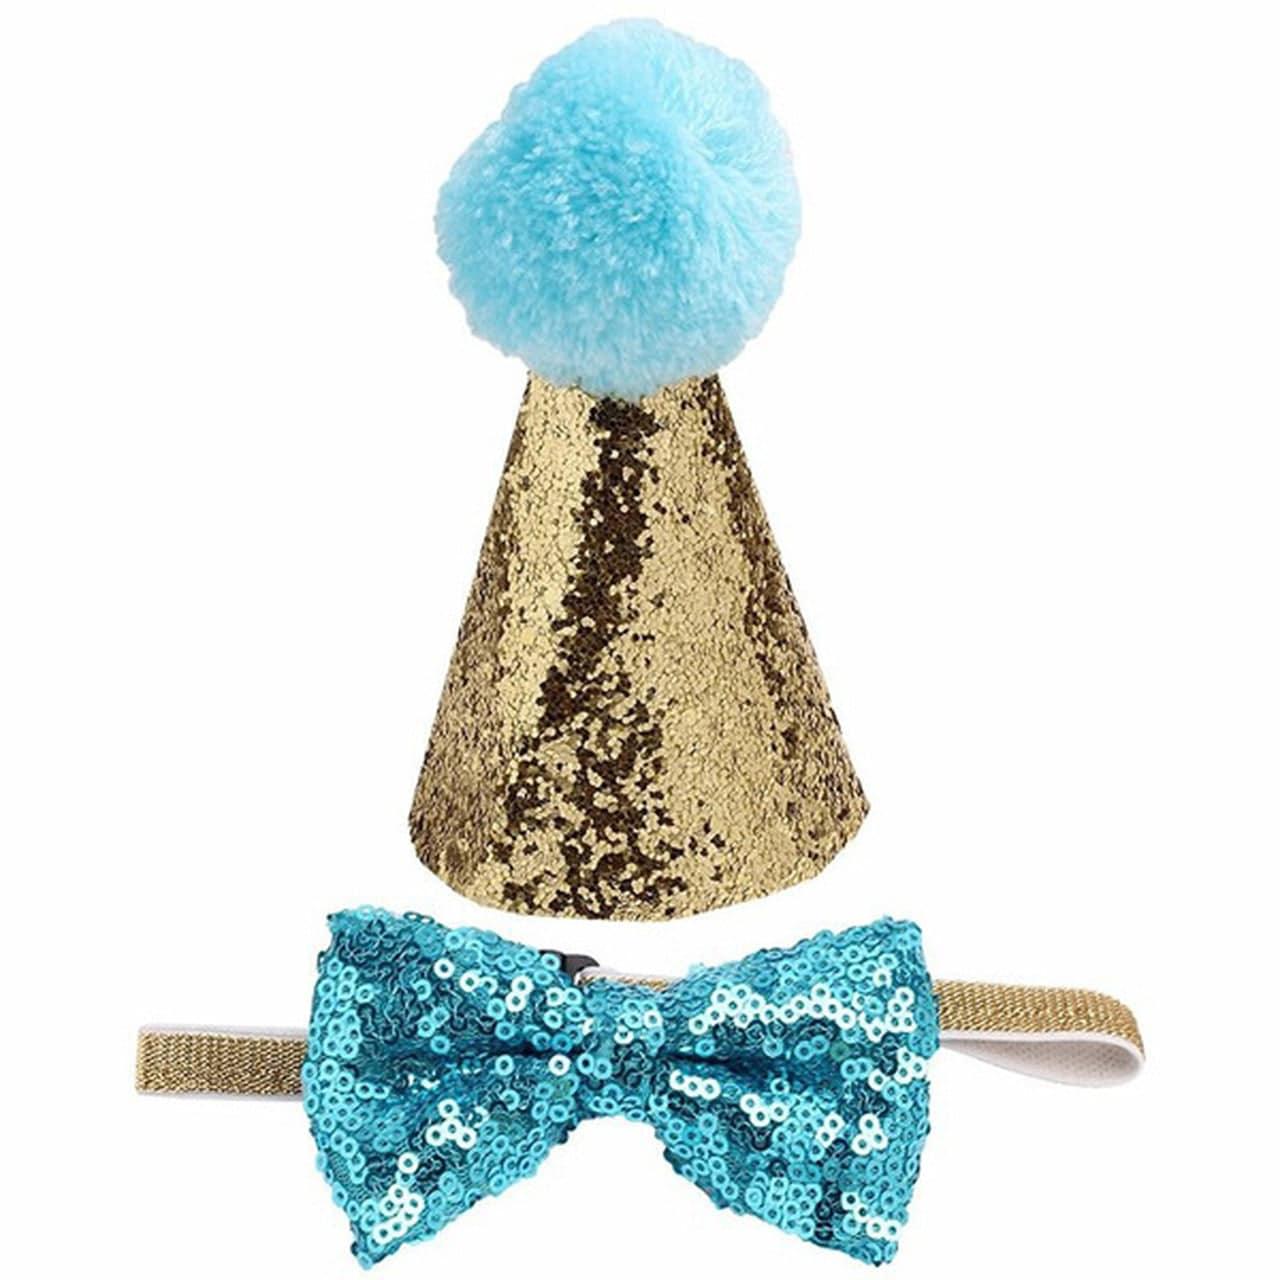 glitter party hat with bow tie aqua/gold